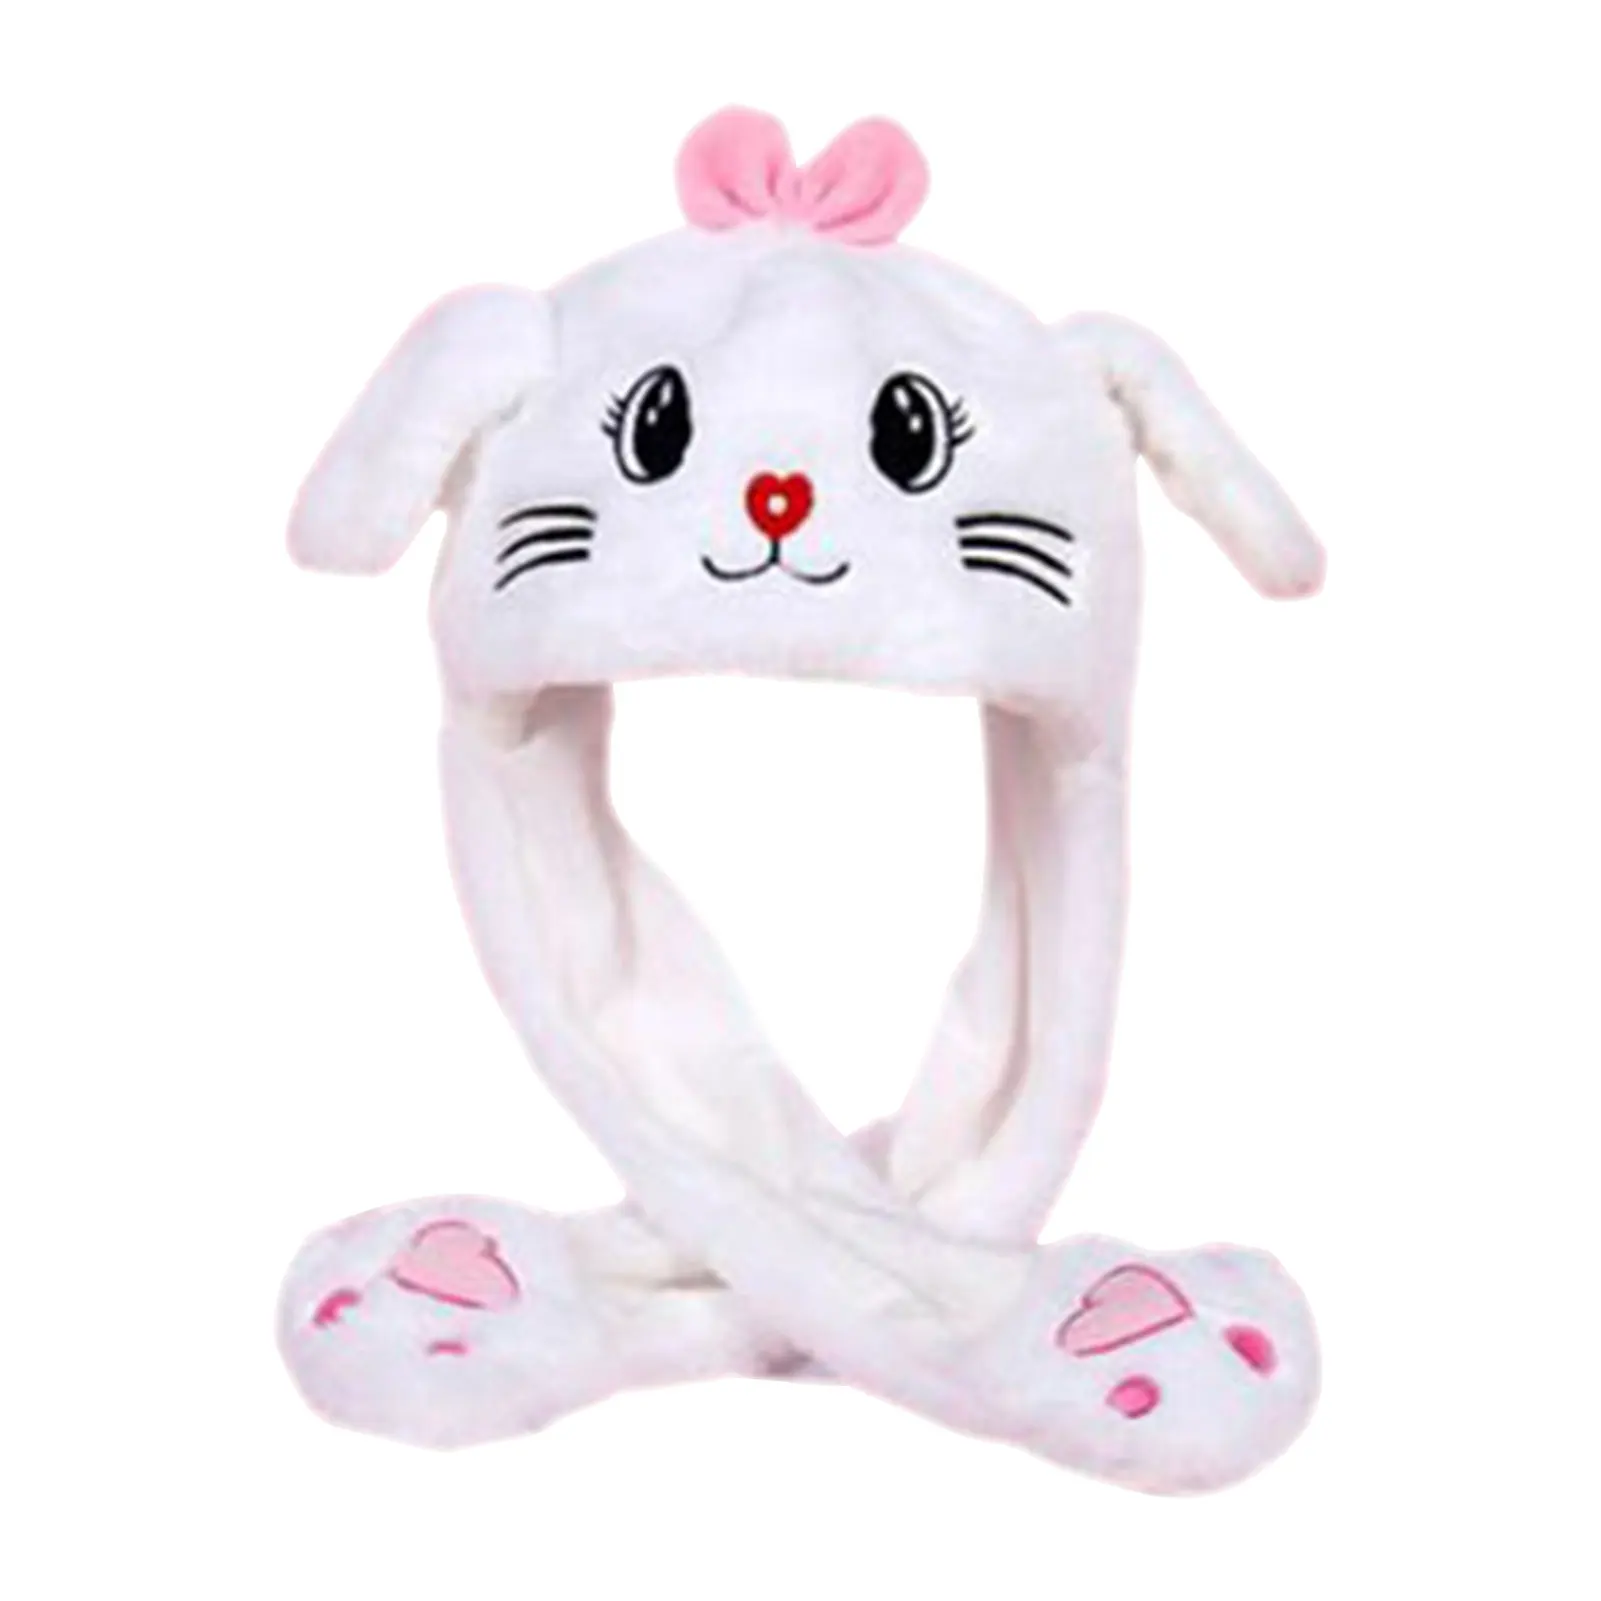 Lovely Moving Bunny Ears Hat Plush Rabbit Hat Funny Play Toy Up Down Moving Bunny Ears Toy Hat Girlfriend Children Girls Gifts 2021 new funny hat baby kids hat cute rabbit ears plush ears can move cap children winter warm party hat pink rabbit